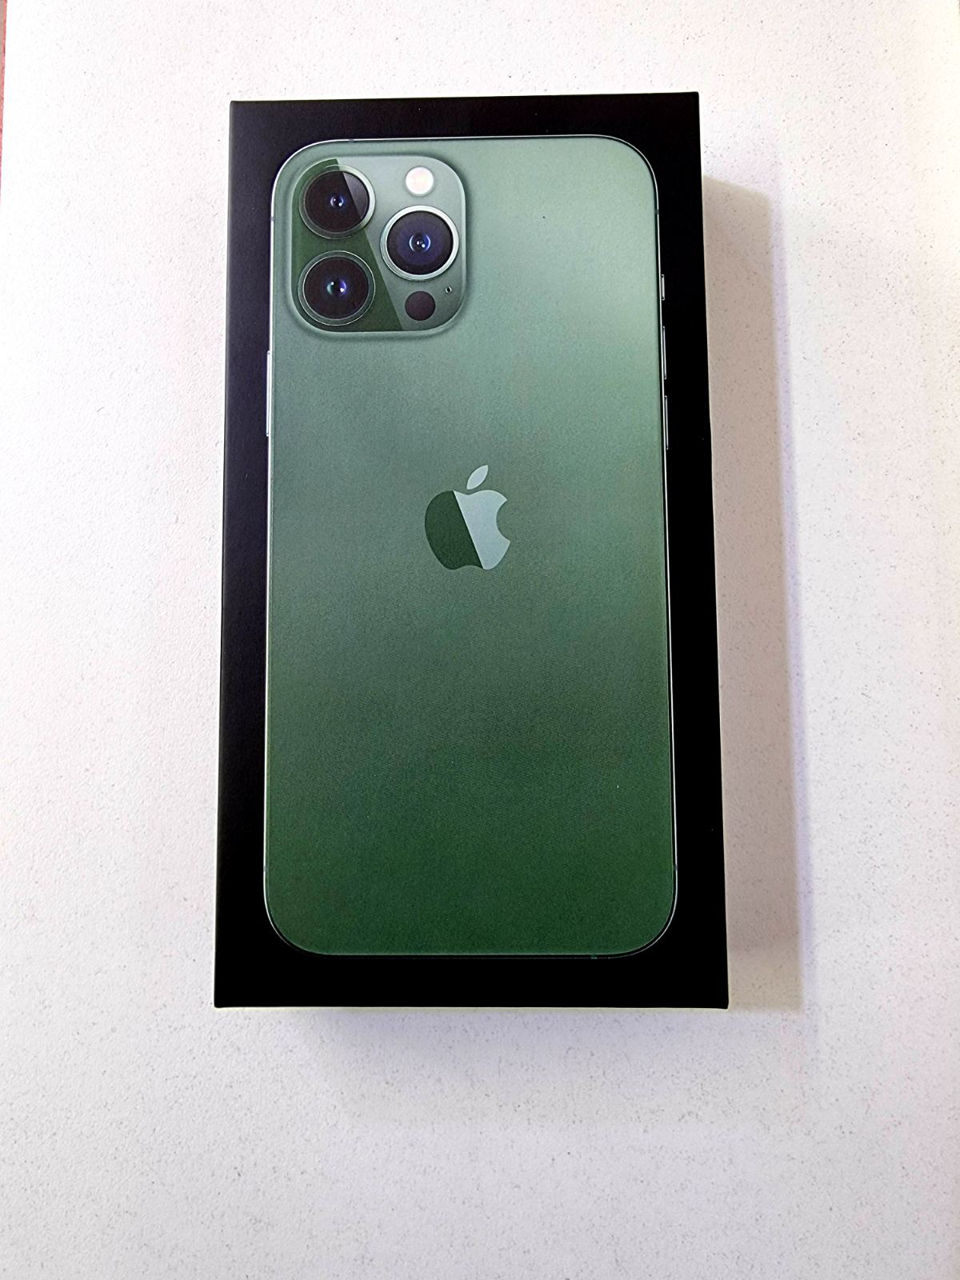 Note 13 pro green. Iphone 13 Pro Max. Iphone 13 Pro Max 128gb Green. Iphone 13 Pro коробка. Iphone 13 Pro зеленый.